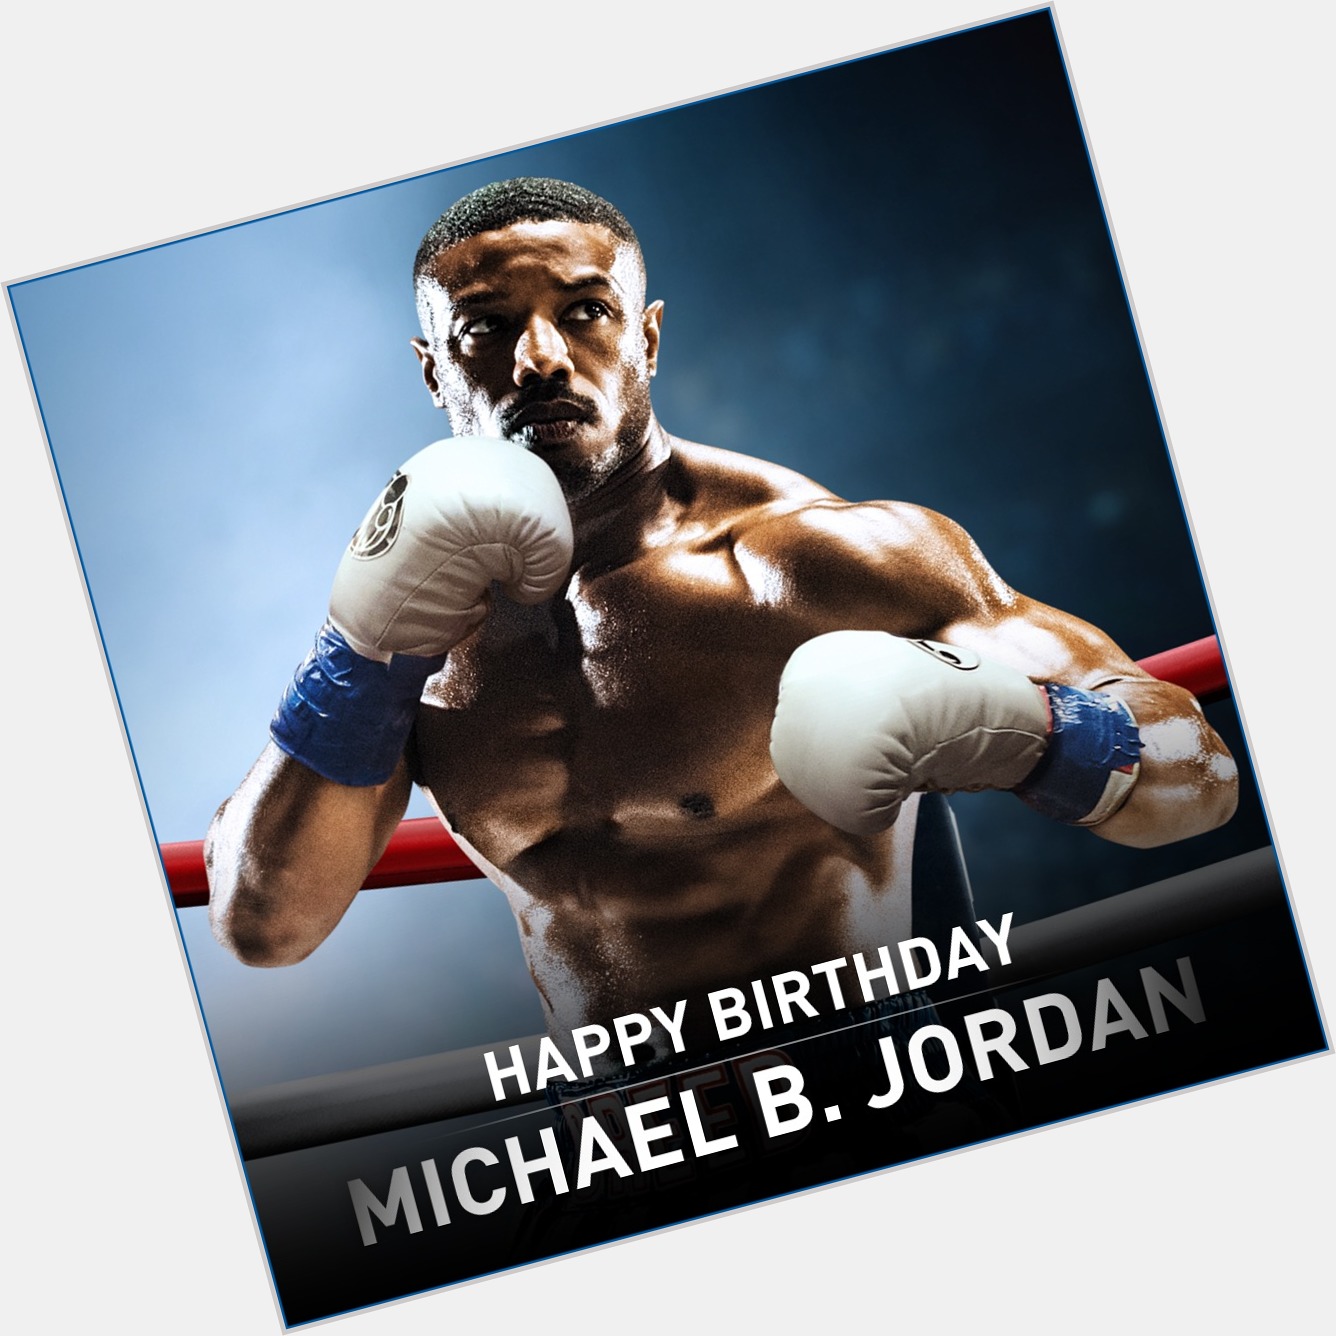 Happy Birthday to Michael B. Jordan who played Adonis Creed, in the movie Creed . 